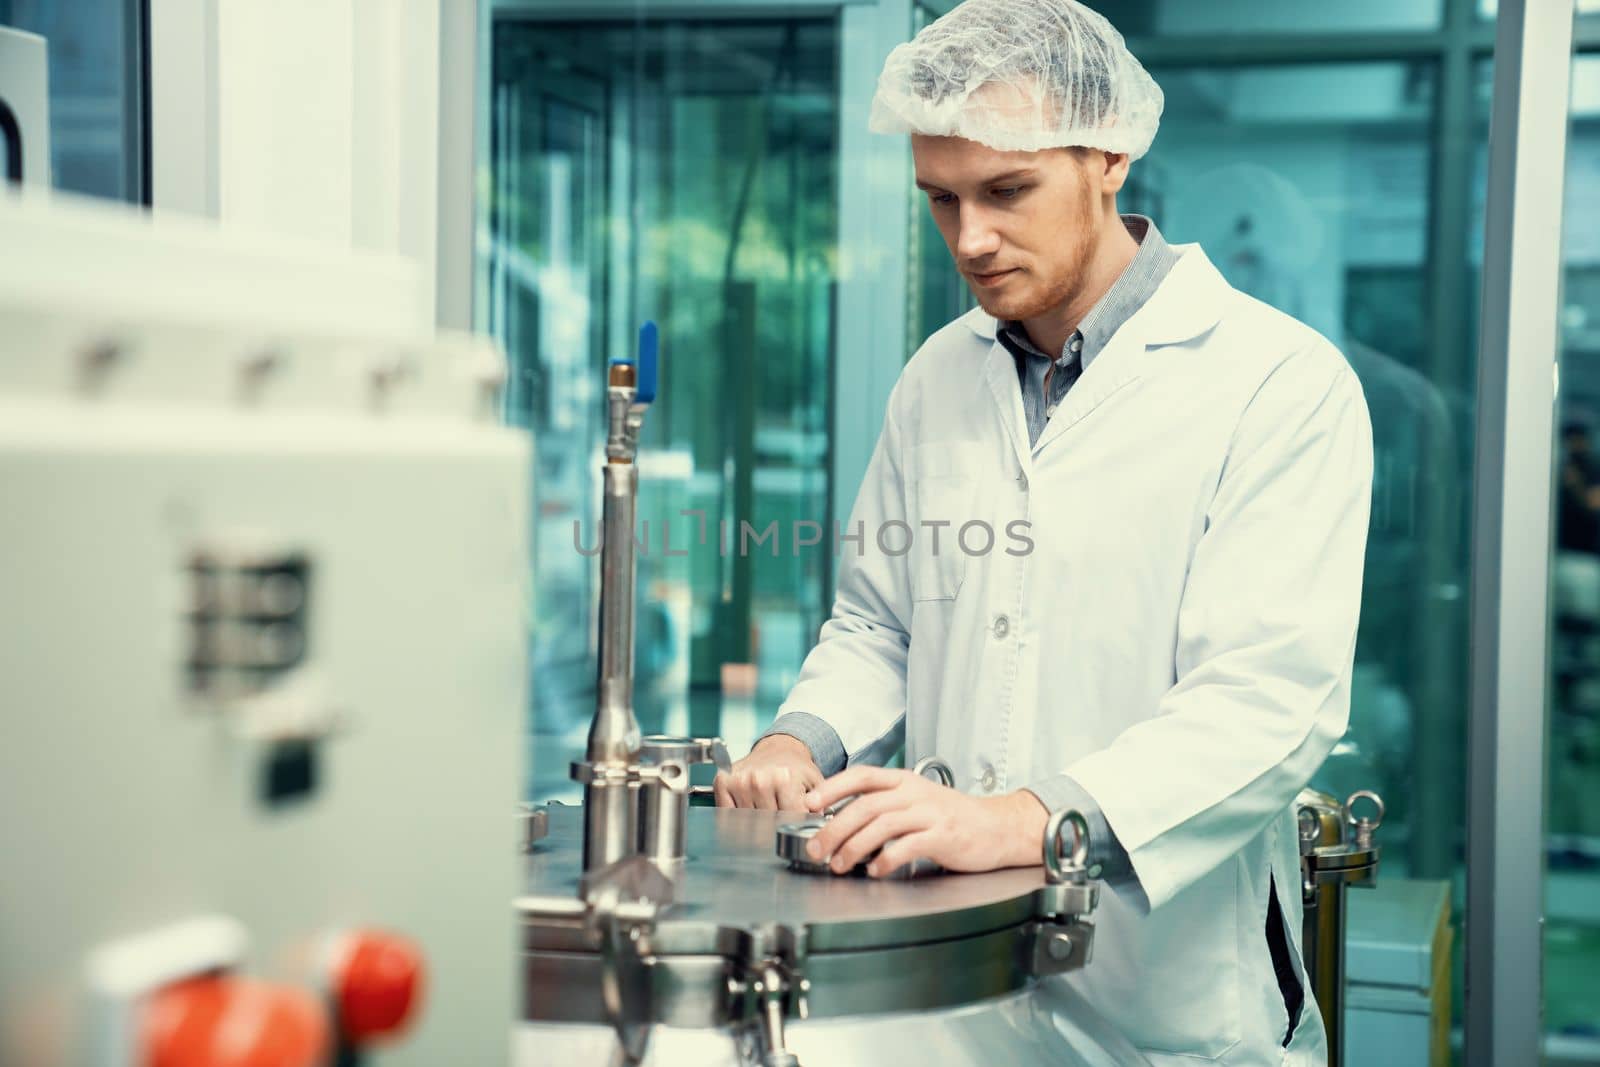 Portrait of a scientist, apothecary extracting cannabis oil using scientific equipment in a laboratory. Concept of cannabis extraction for alternative medicinal treatment. CBD oil extraction concept.